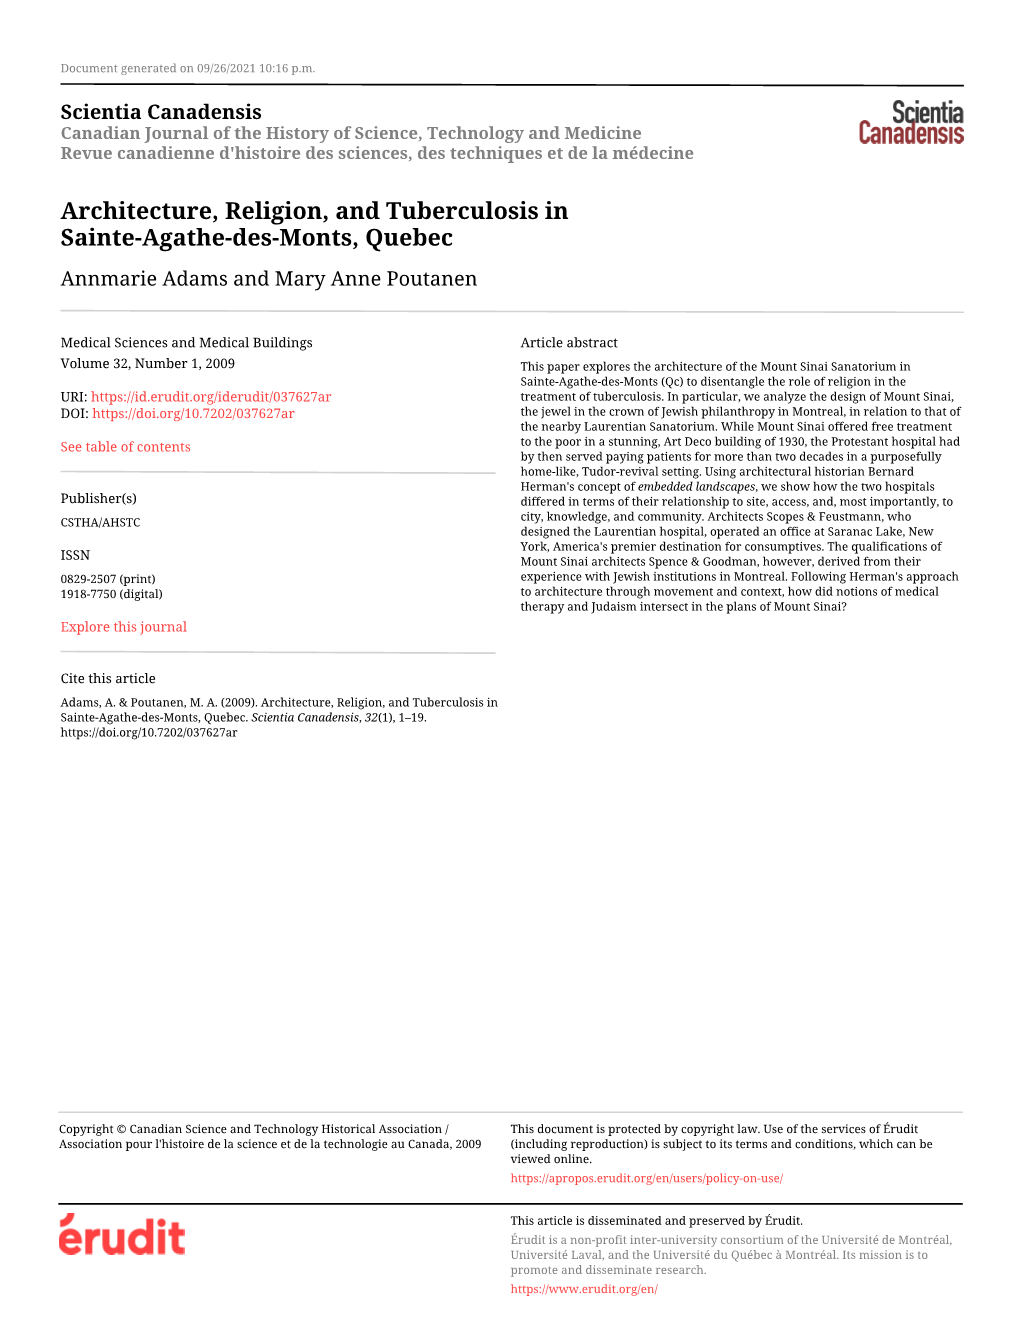 Architecture, Religion, and Tuberculosis in Sainte-Agathe-Des-Monts, Quebec Annmarie Adams and Mary Anne Poutanen